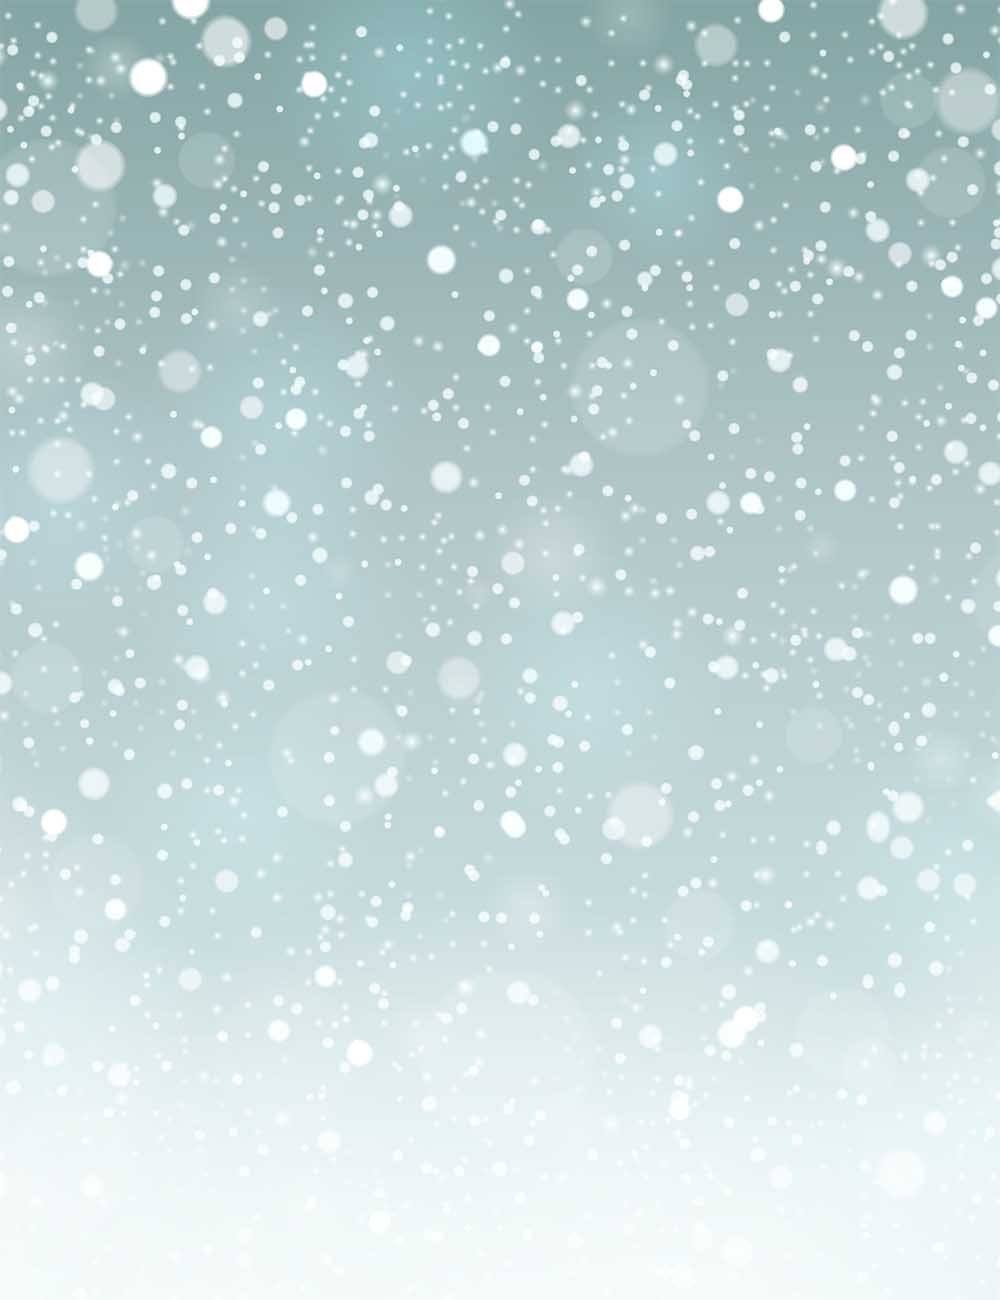 Abstract Snow Winter For Holiday Photography Backdrop Shopbackdrop